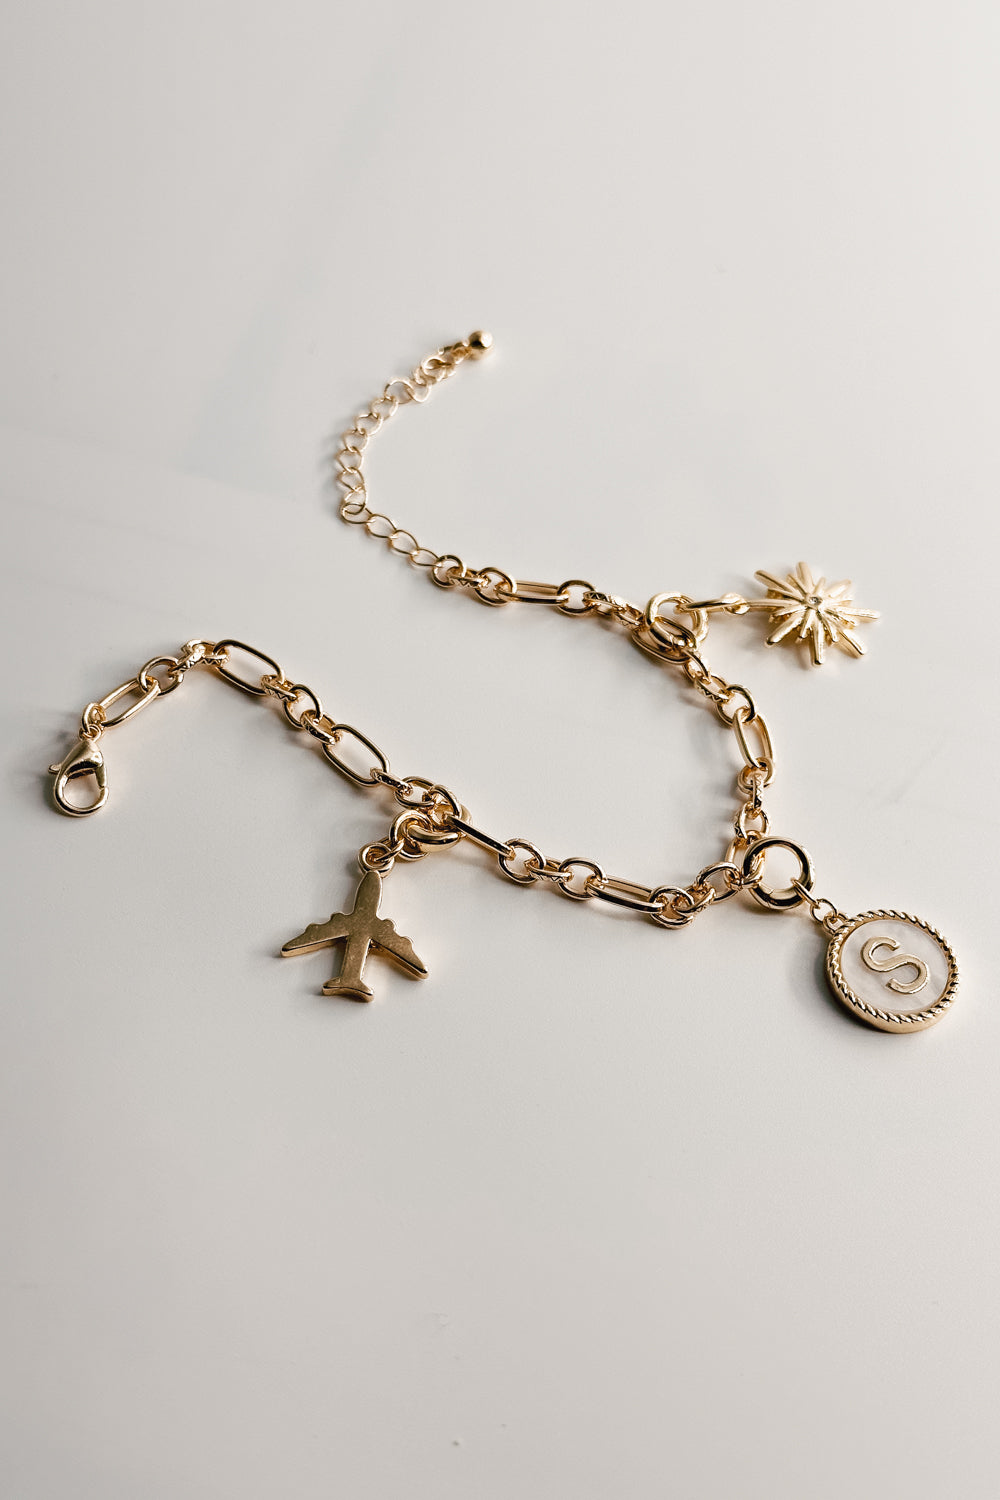 Image shows the Reagan Gold Chain Link Bracelet against a white background. Bracelet has gold circle and oval links. Shown with 3 assorted charms attached.